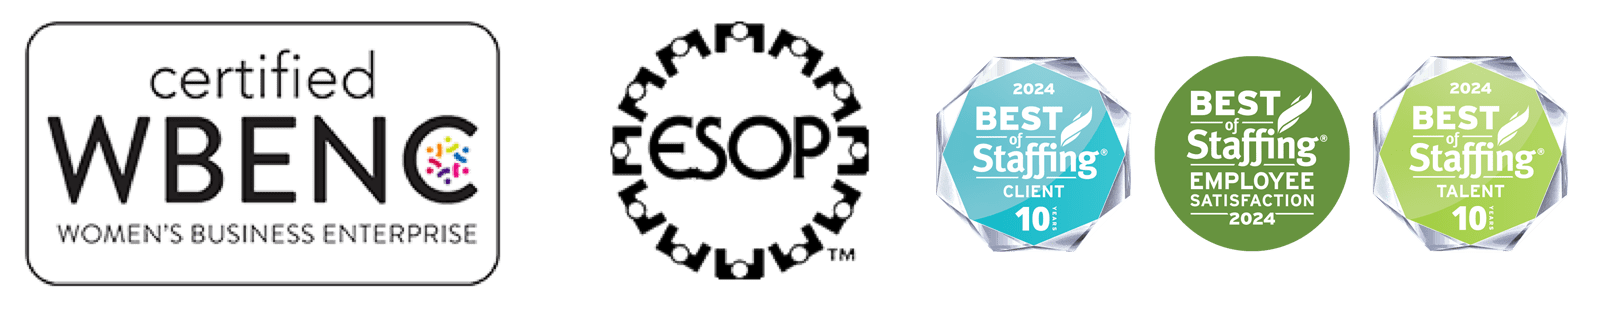 WBENC ESOP ClearlyRated logos